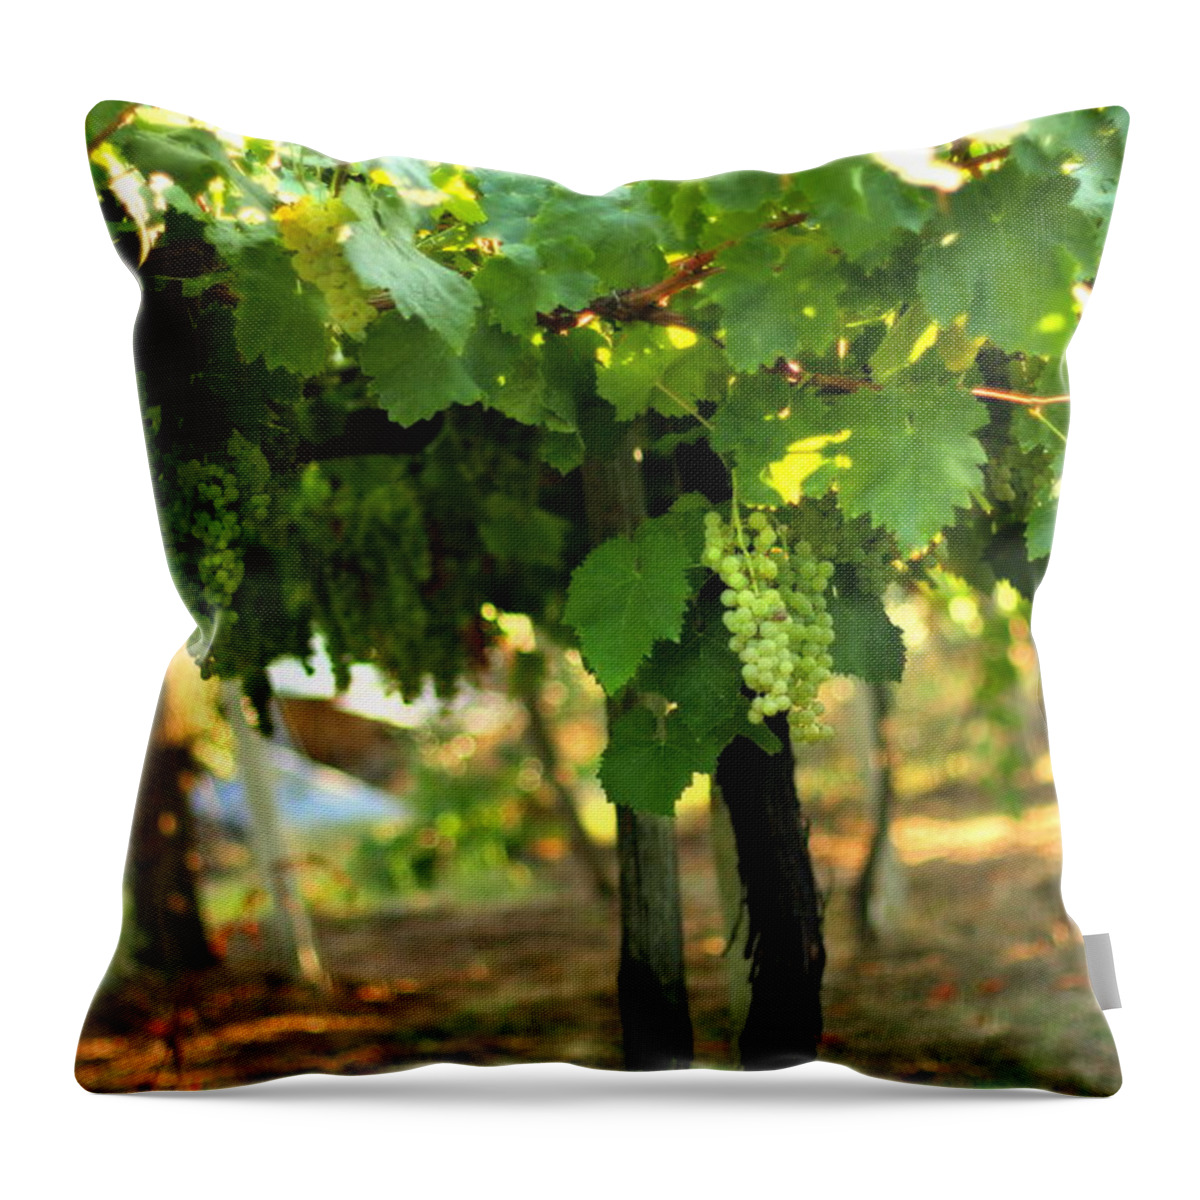 Vineyard Throw Pillow featuring the photograph Grapevines 5 by Angela Rath